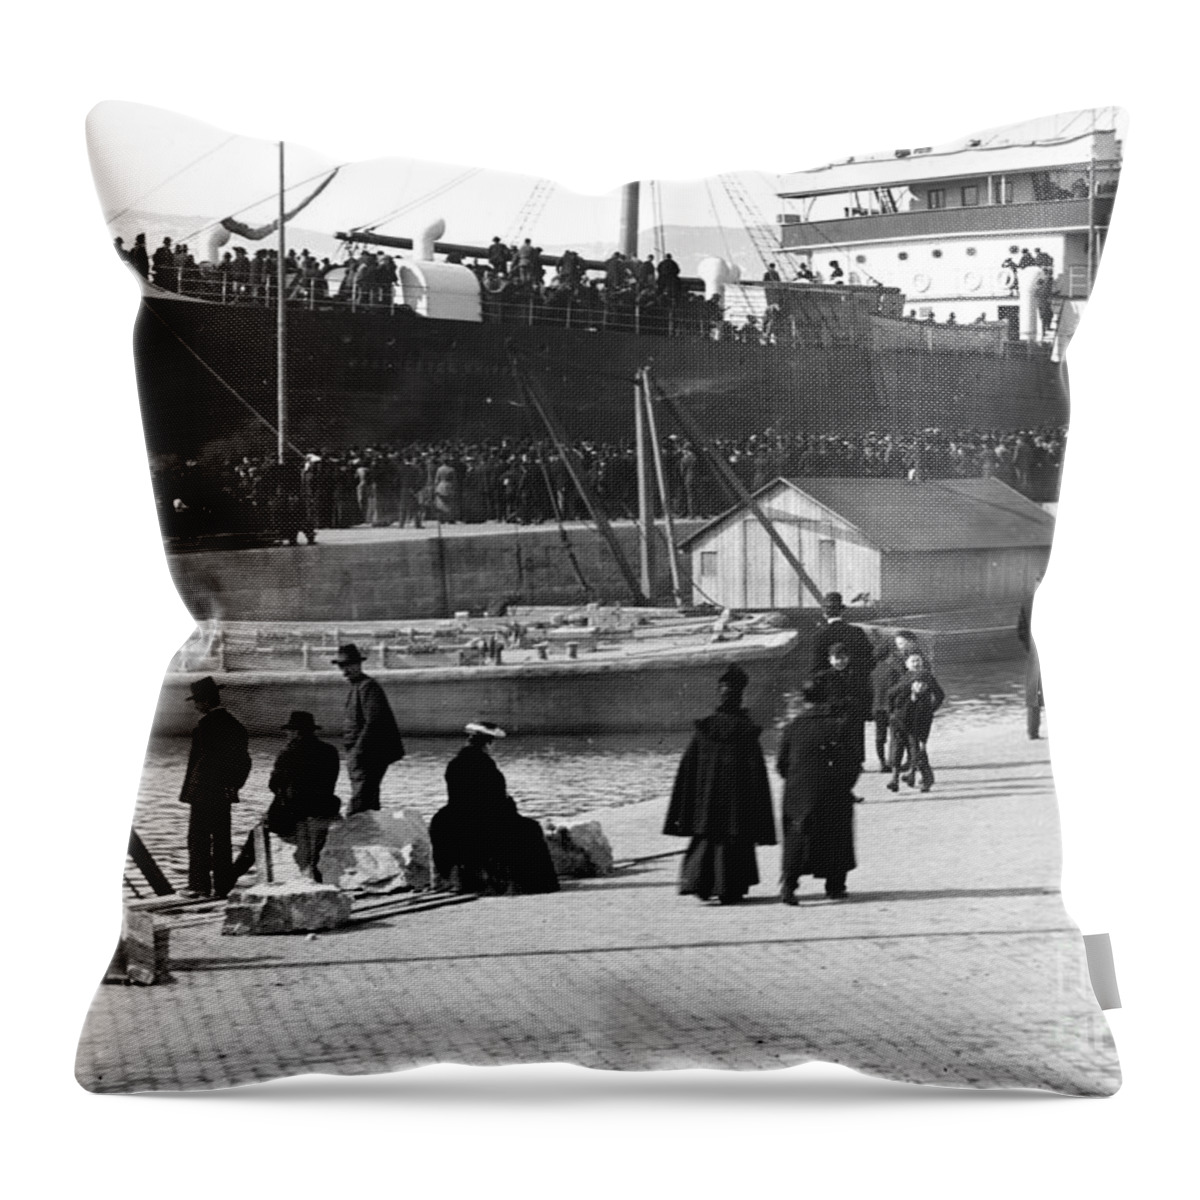 Exterior Throw Pillow featuring the photograph Emigrant ship by O Vaering